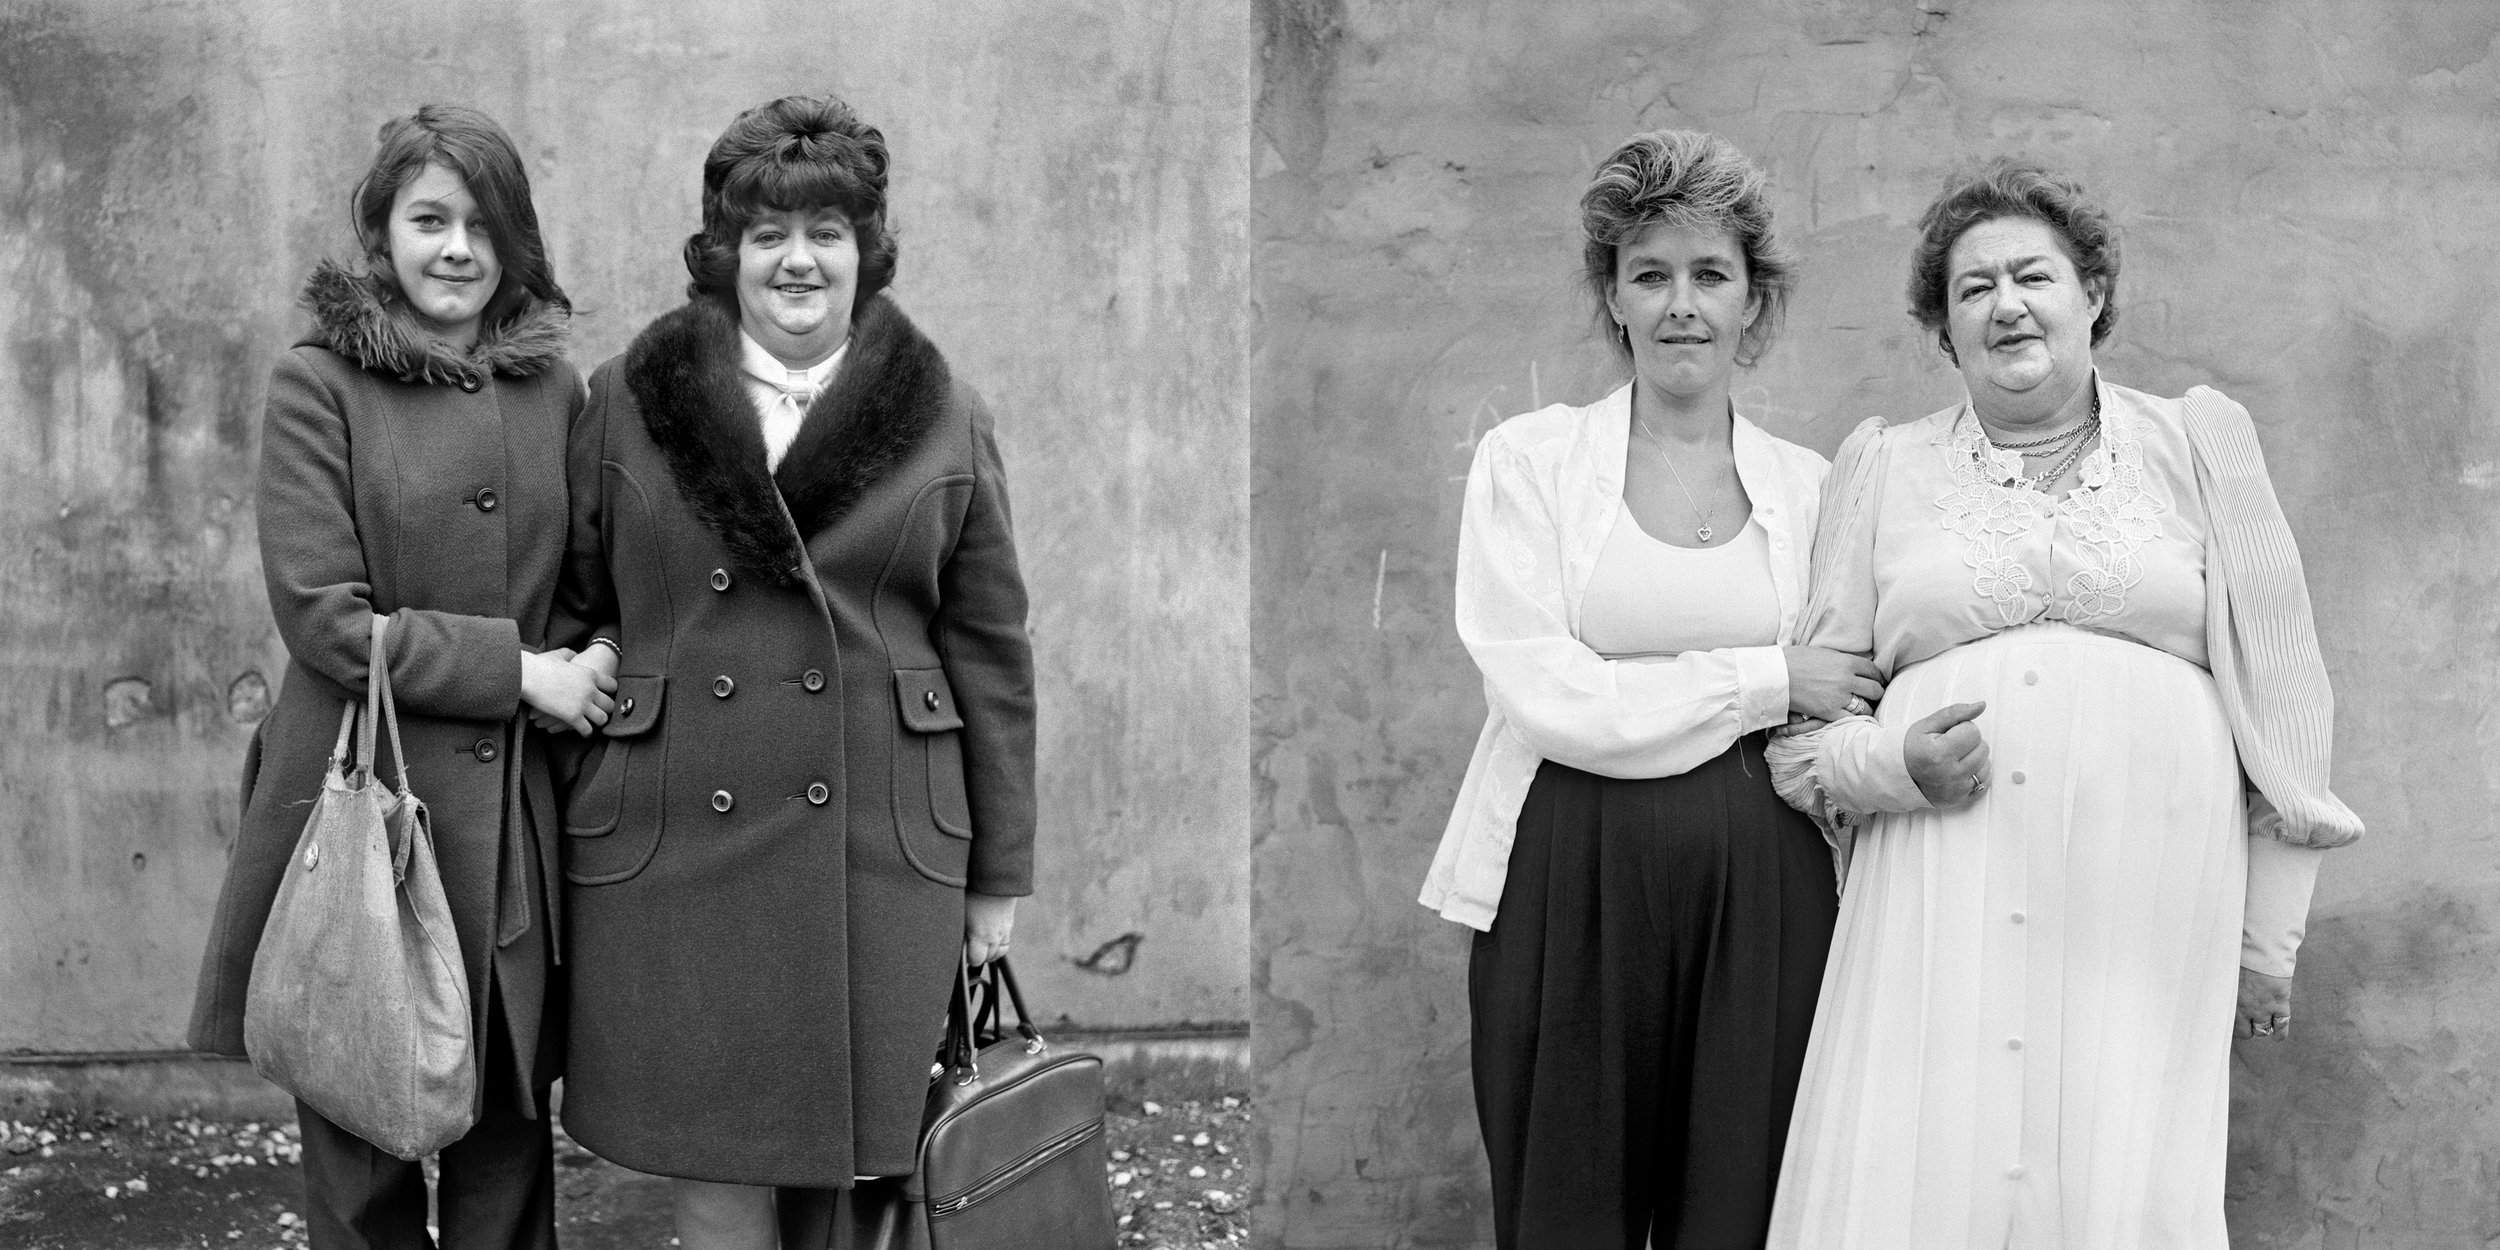  Now and Then portrait from the Free Photographic Omnibus, Mother and daughter: left, Karen Cubin; right, Barbara Taylor, Barrow-in-Furness, Cumbria. 1974 and 1995 ©Daniel Meadows 